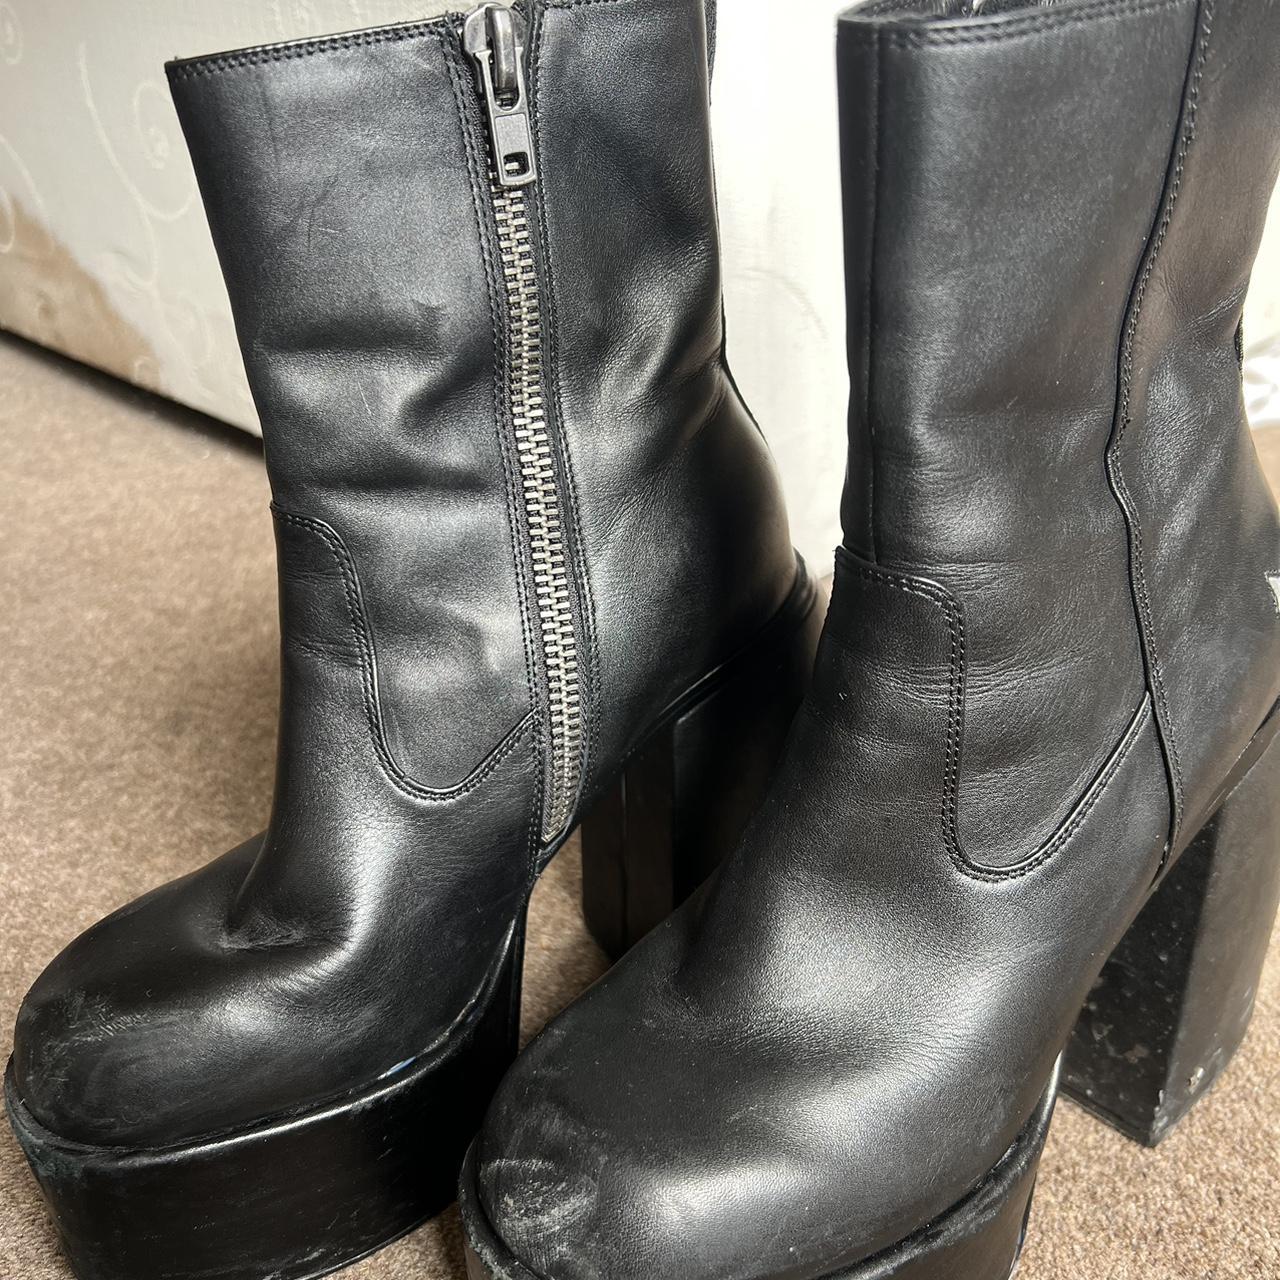 Naked Wolf Boots - Depop